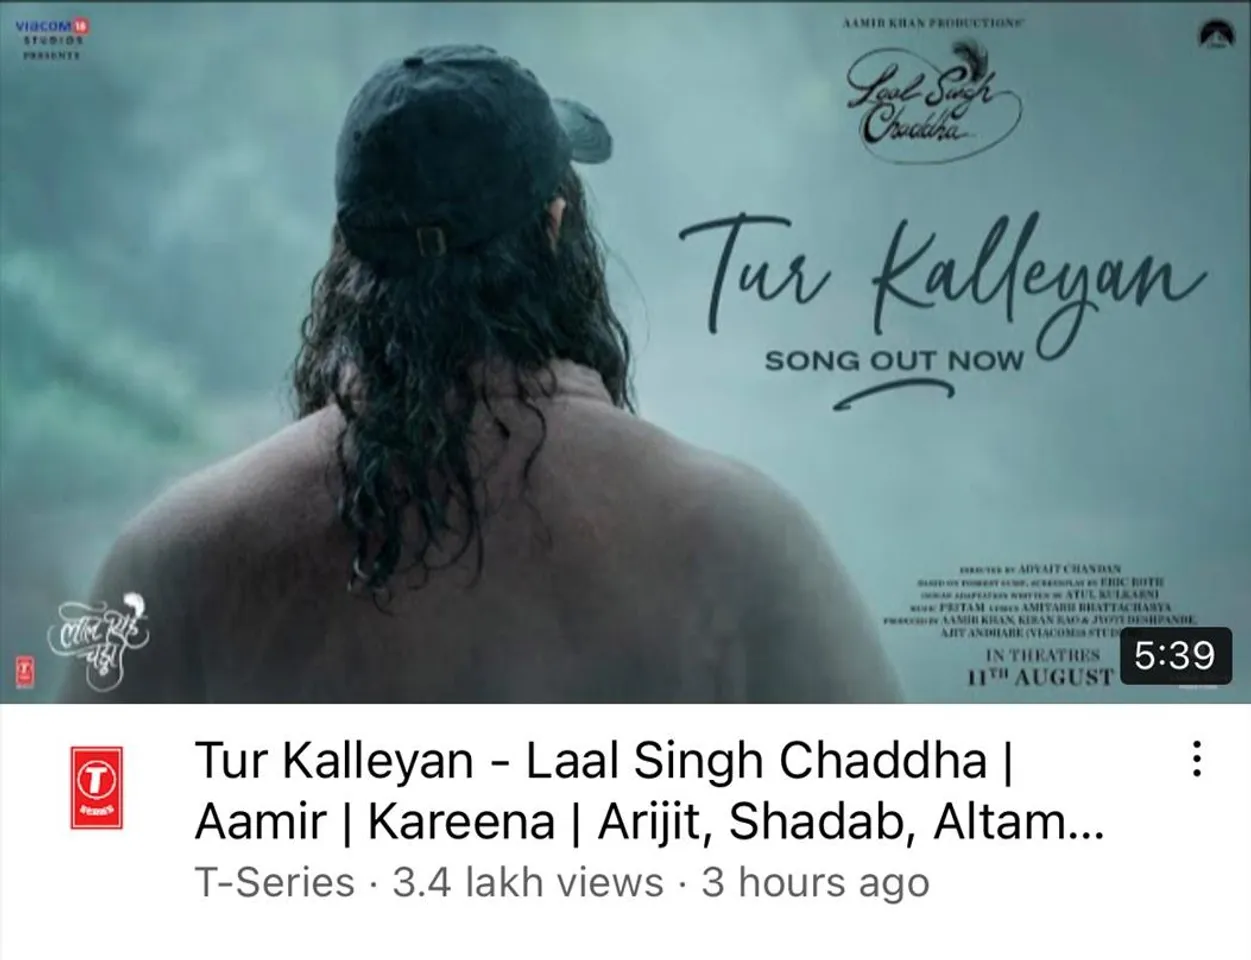 Tur Kalleyan song is out now